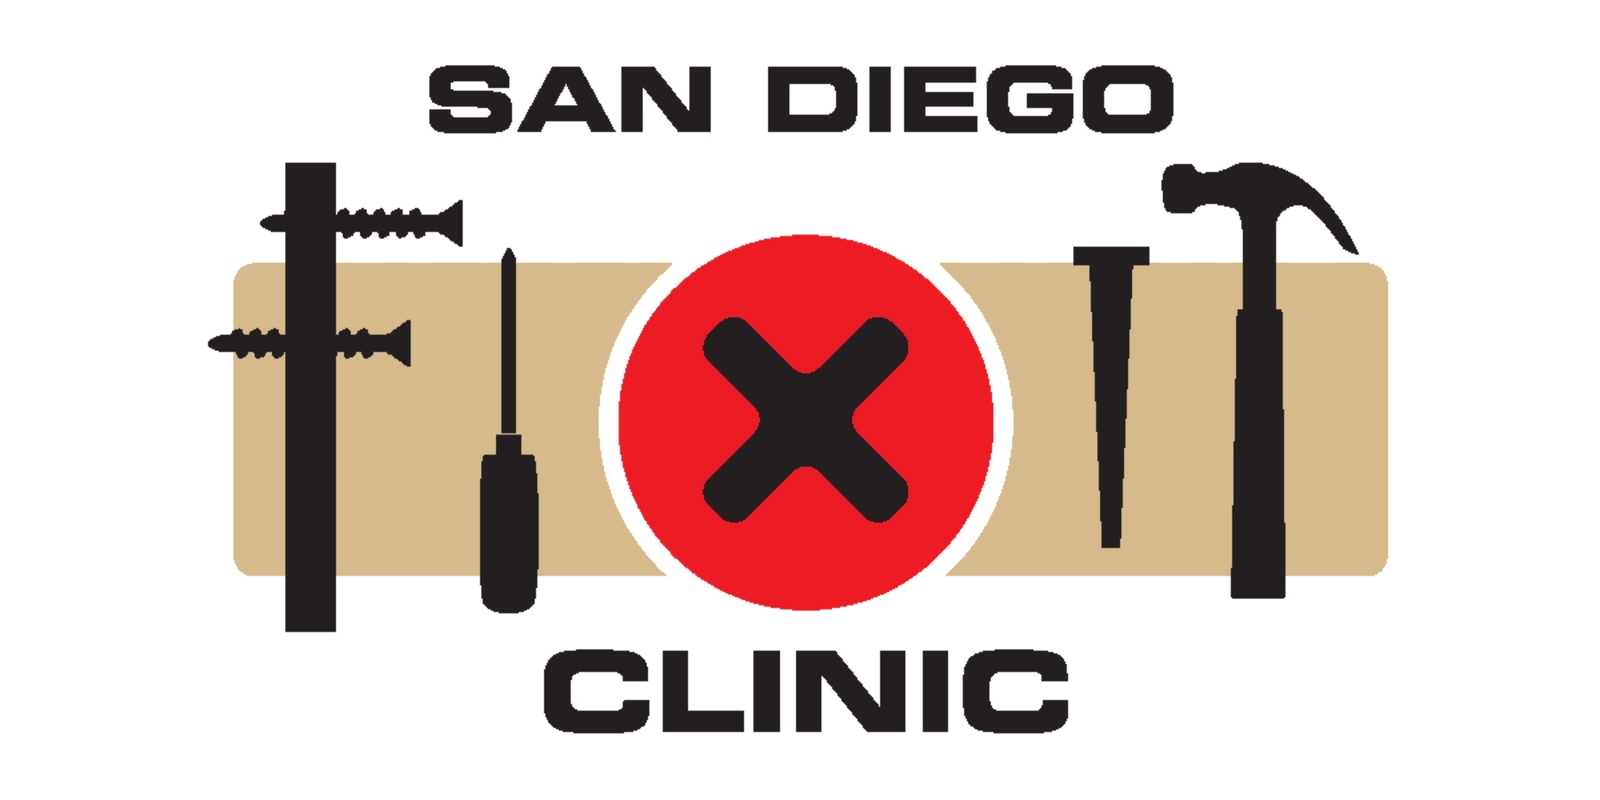 SD Fixit Clinic's banner